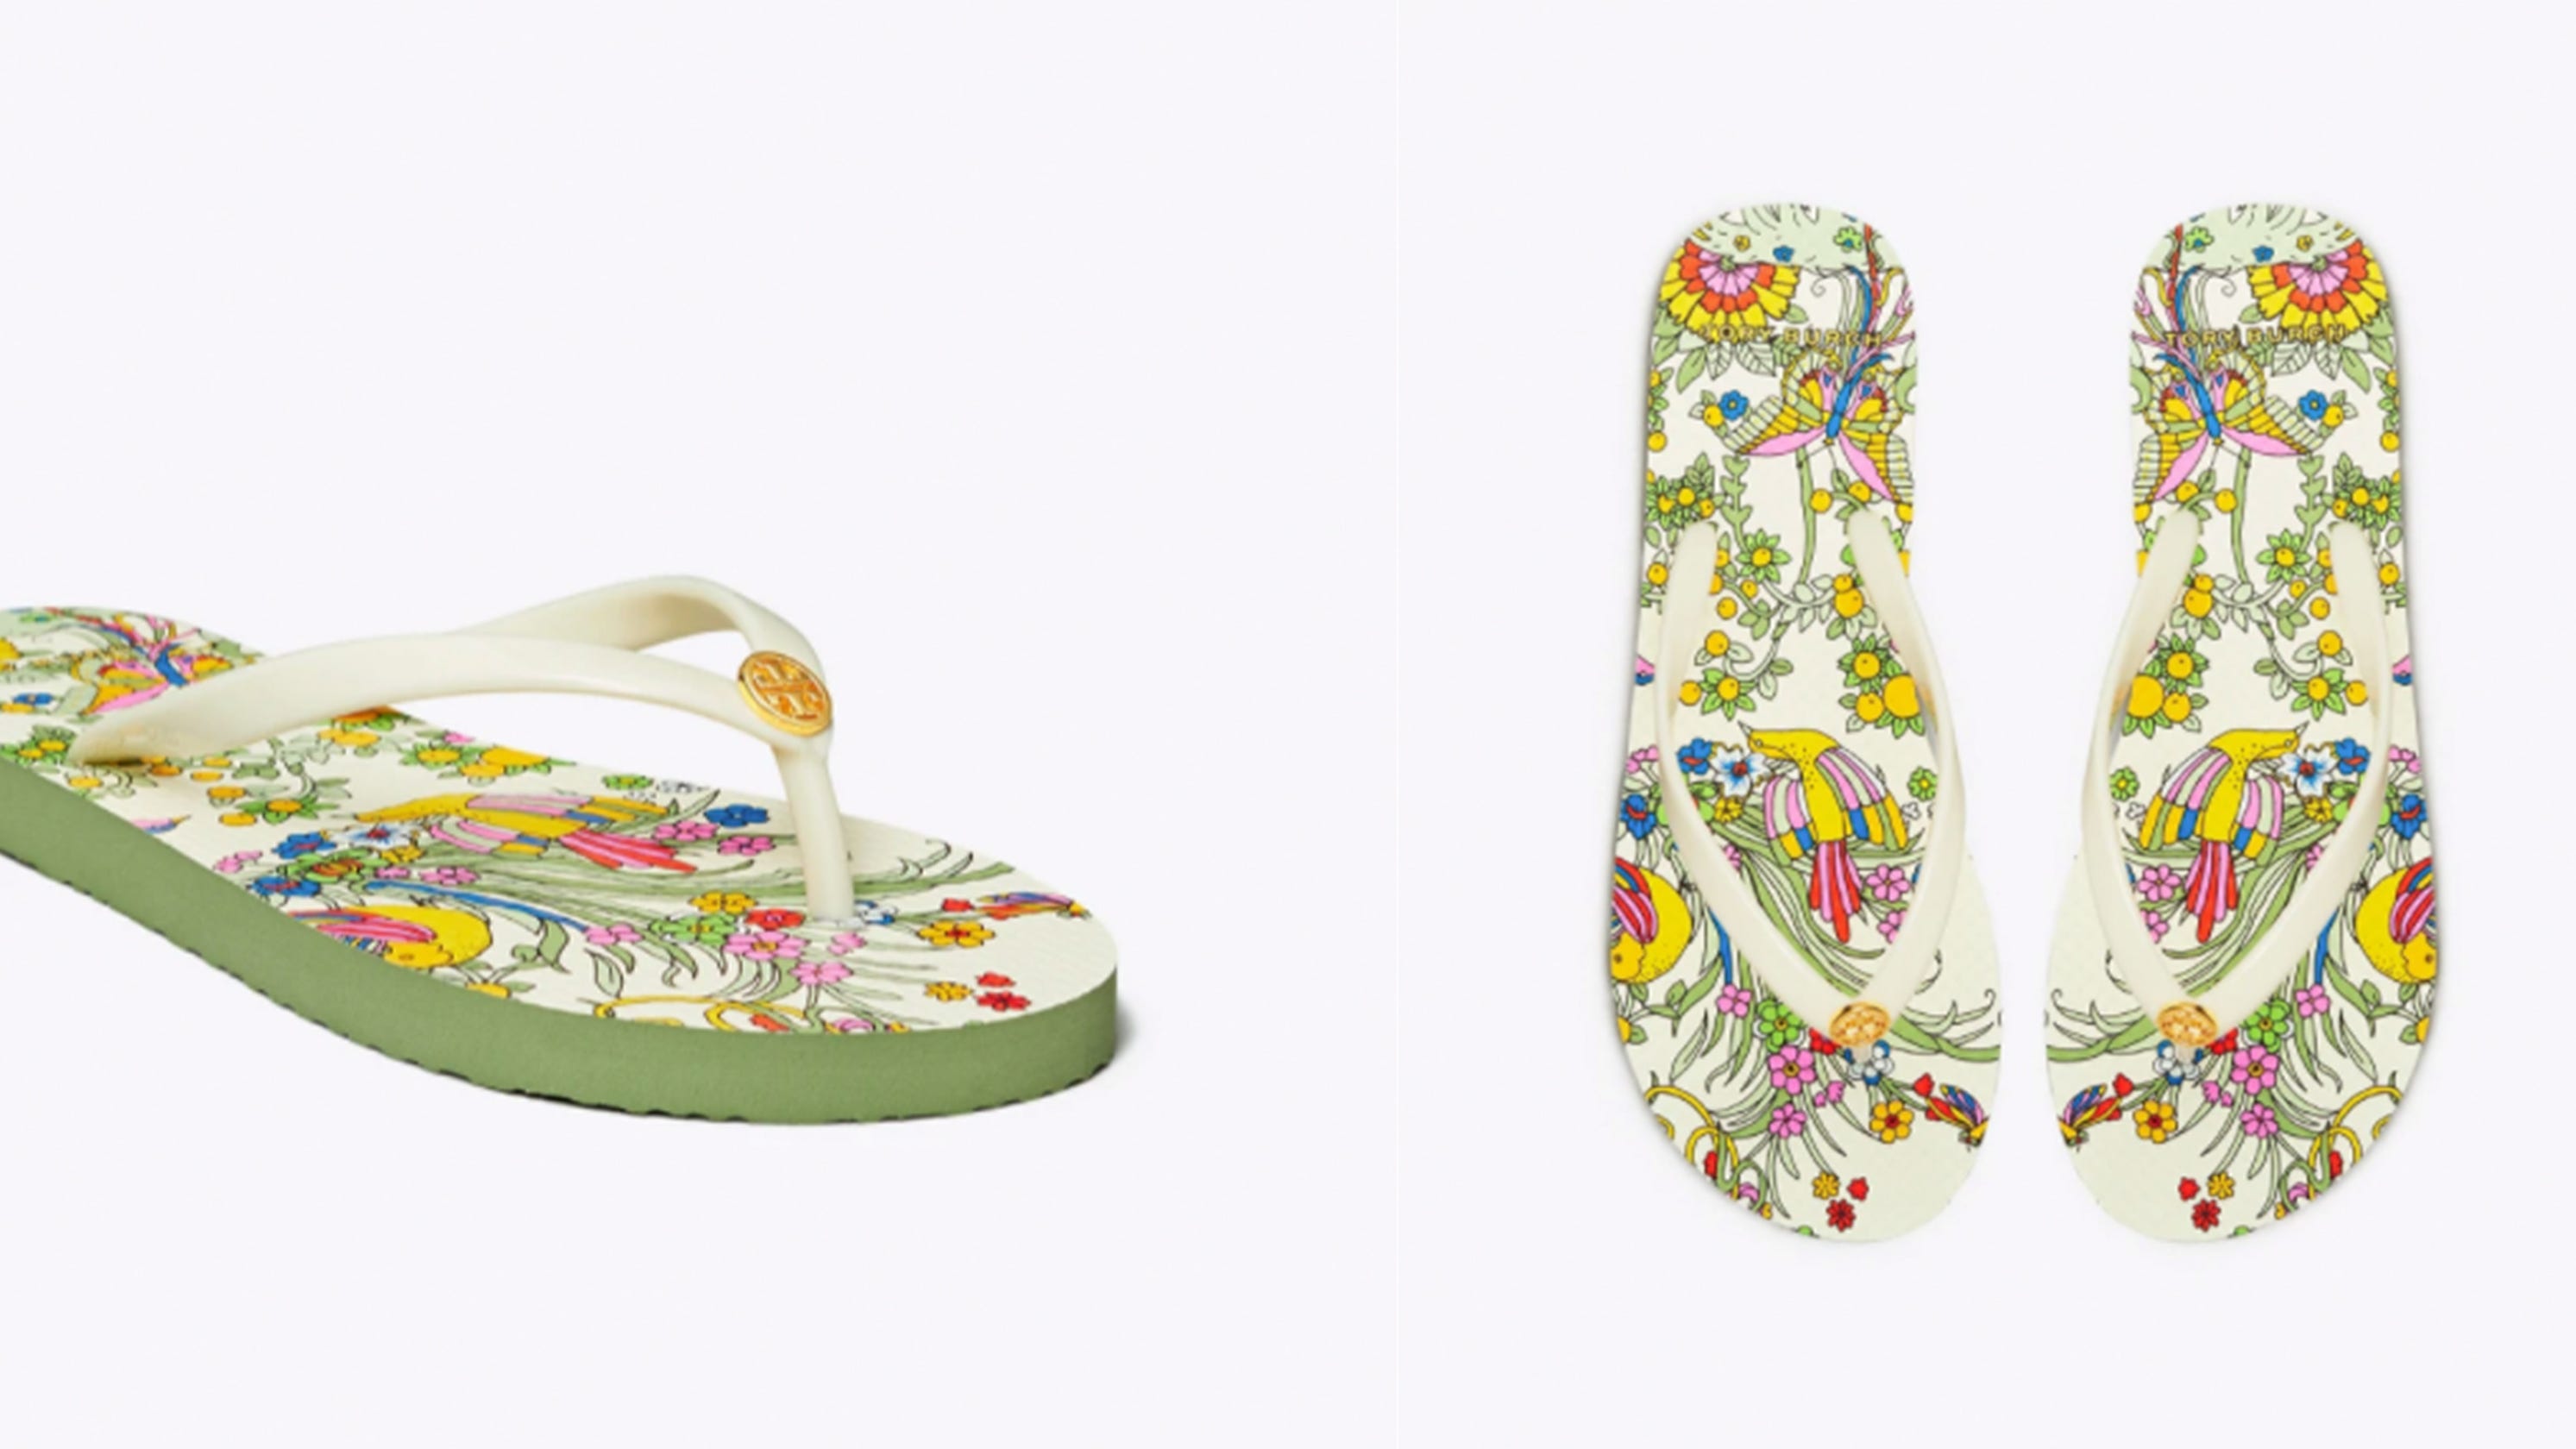 Tory Burch flip-flops: These high-quality styles are on sale now